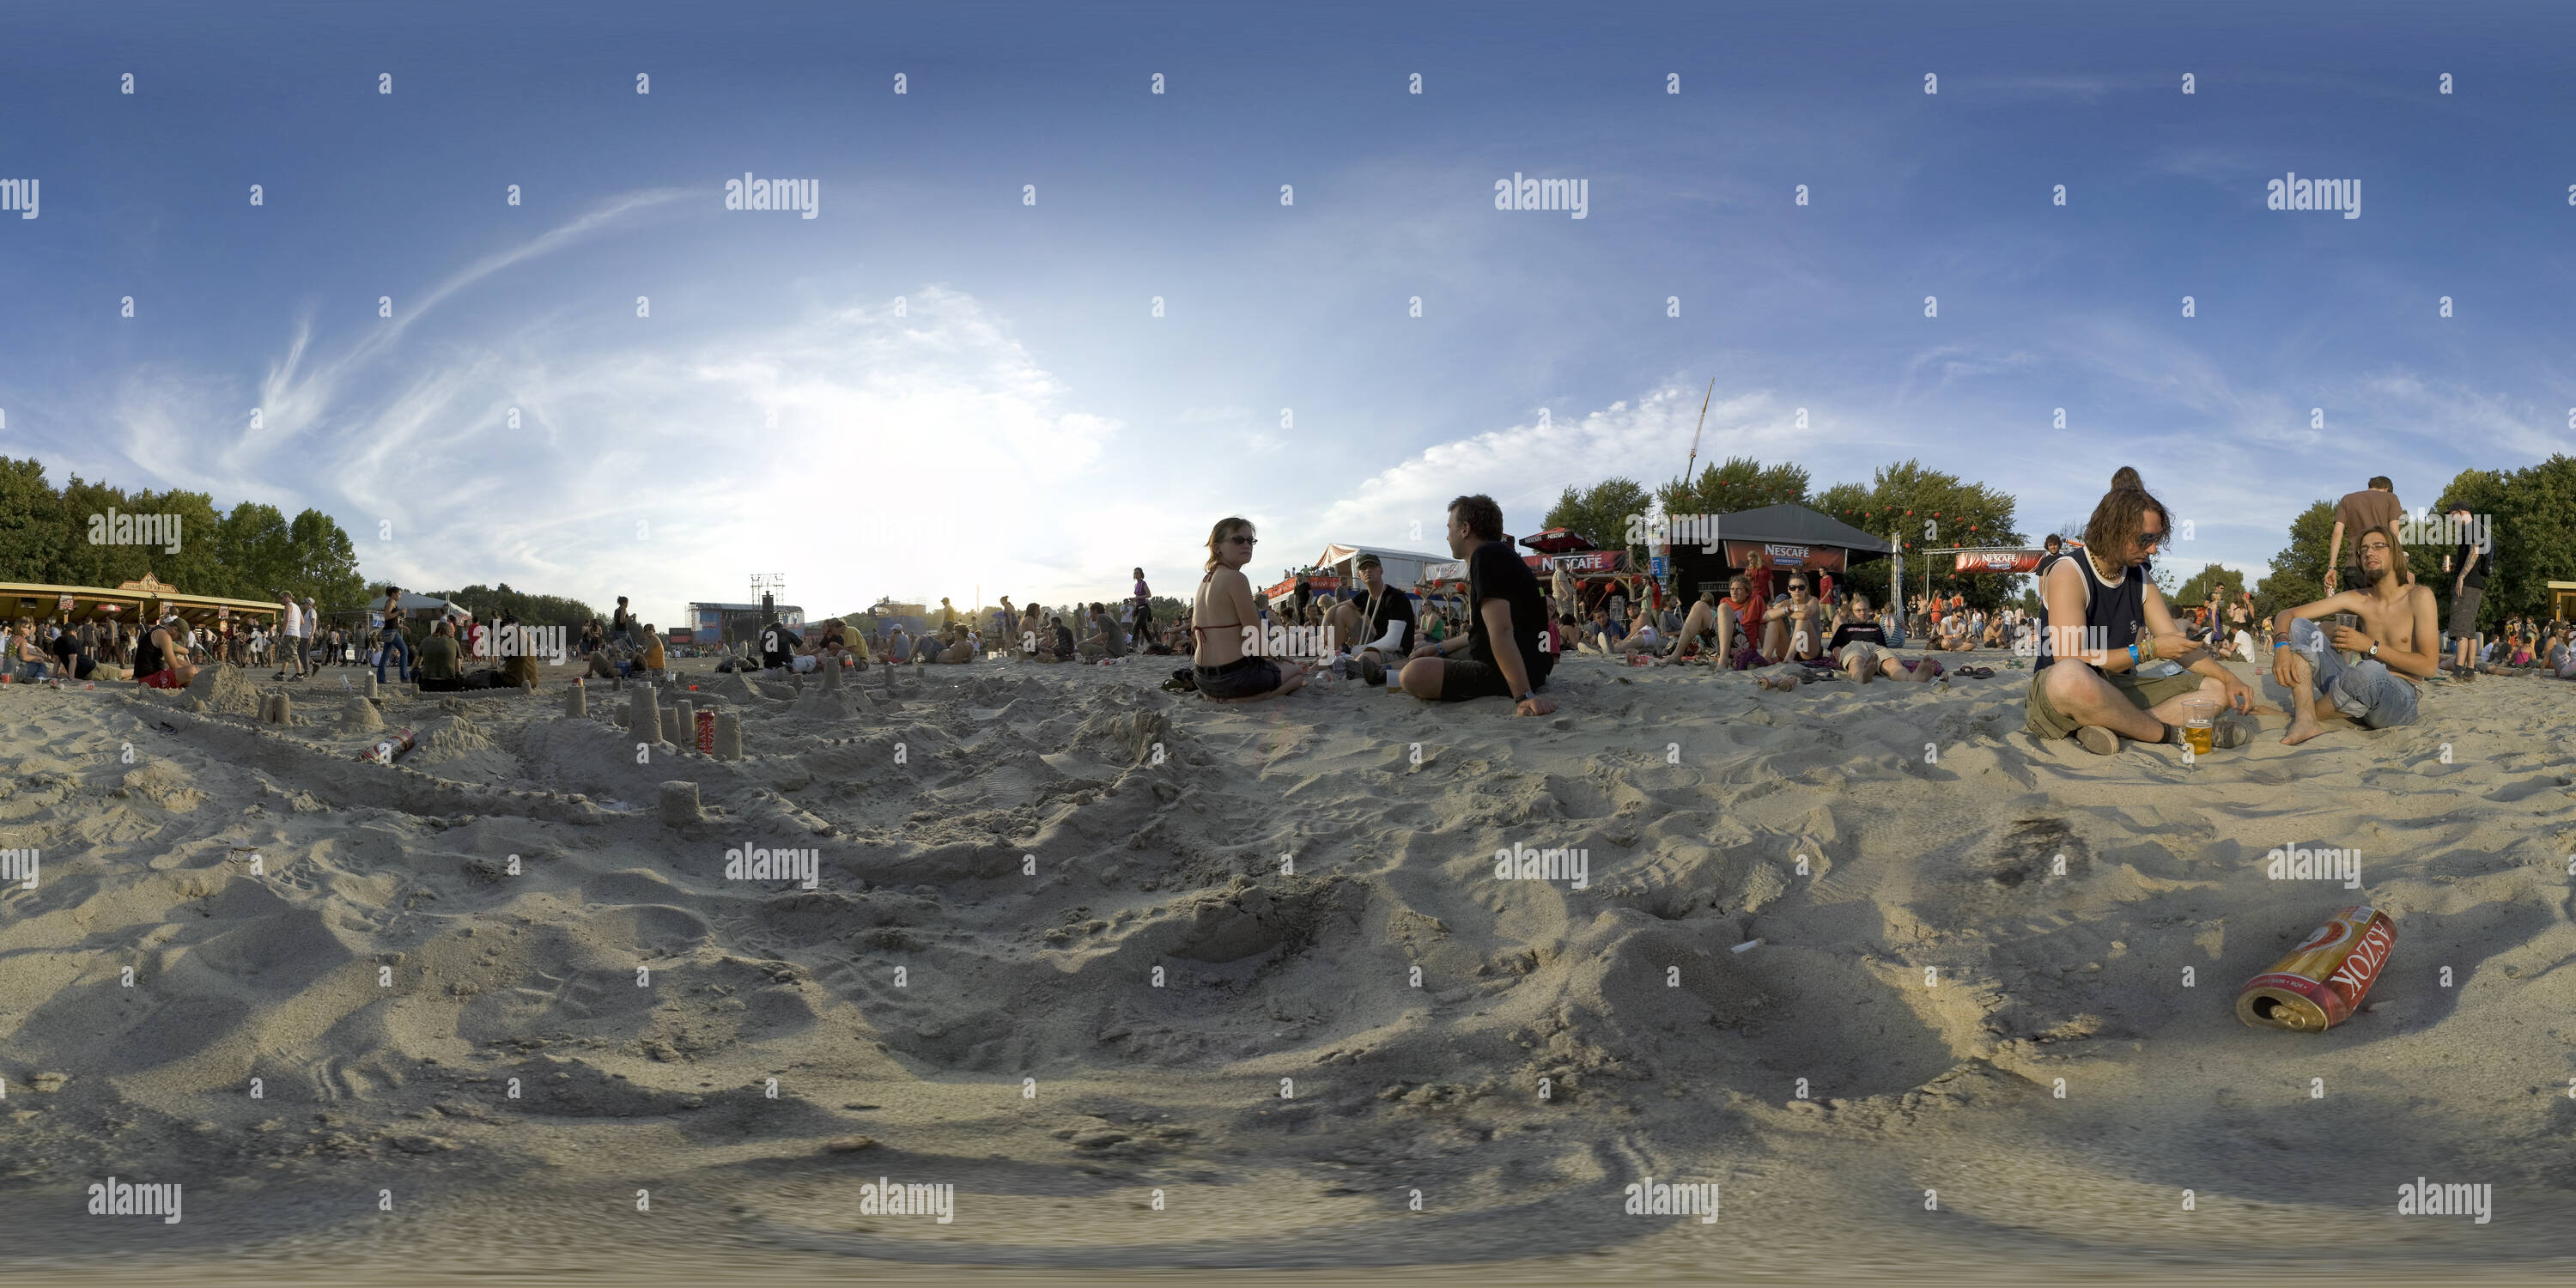 360 degree panoramic view of Sziget Festival 2007